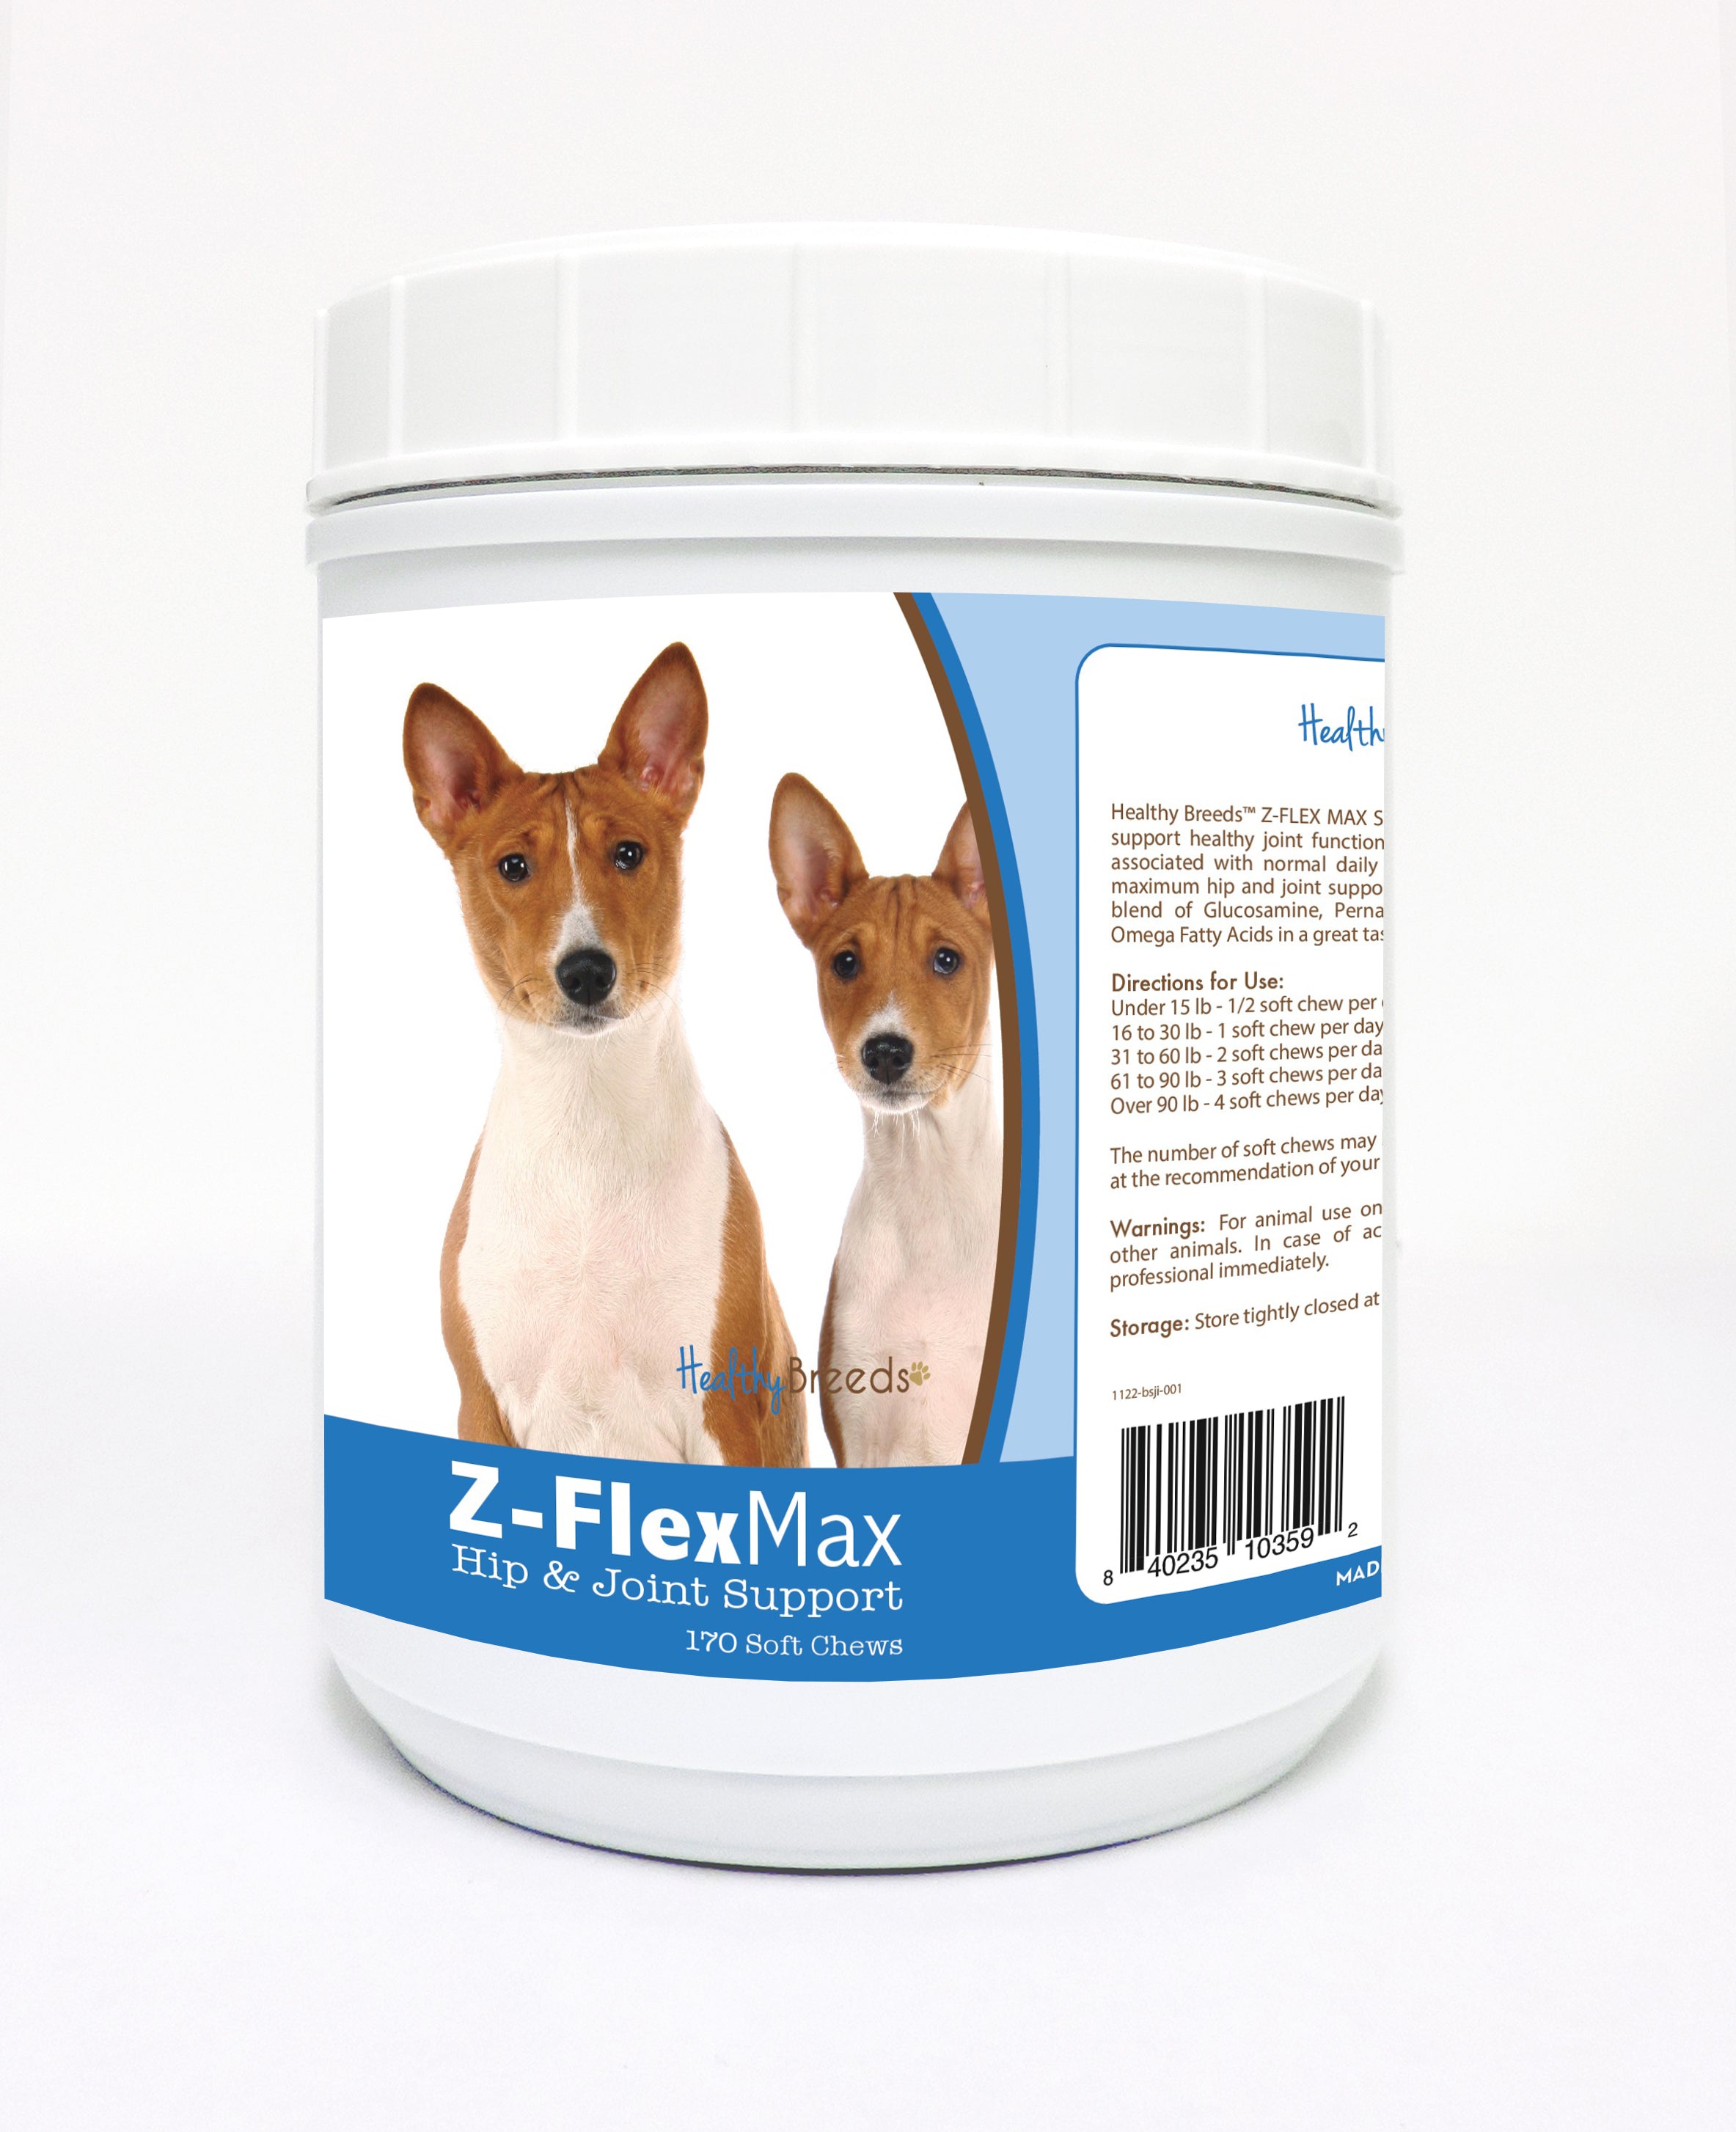 Basenji Z-Flex Max Hip and Joint Soft Chews 170 Count